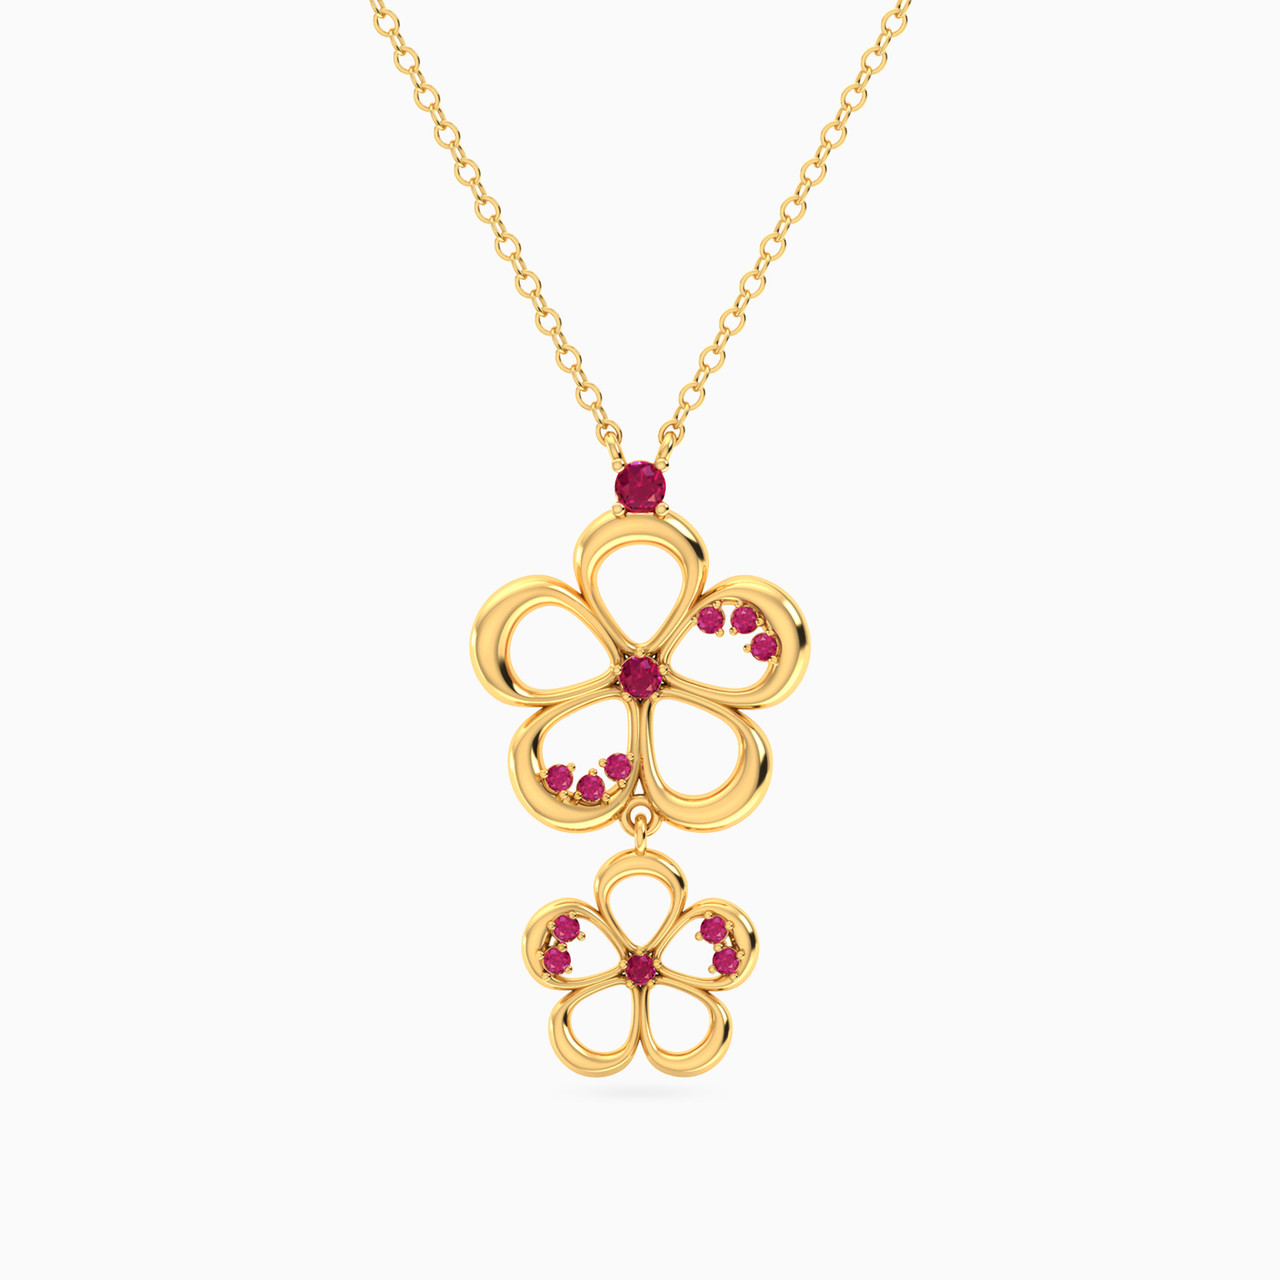 Flower Shaped Colored Stones Pendant with 18K Gold Chain